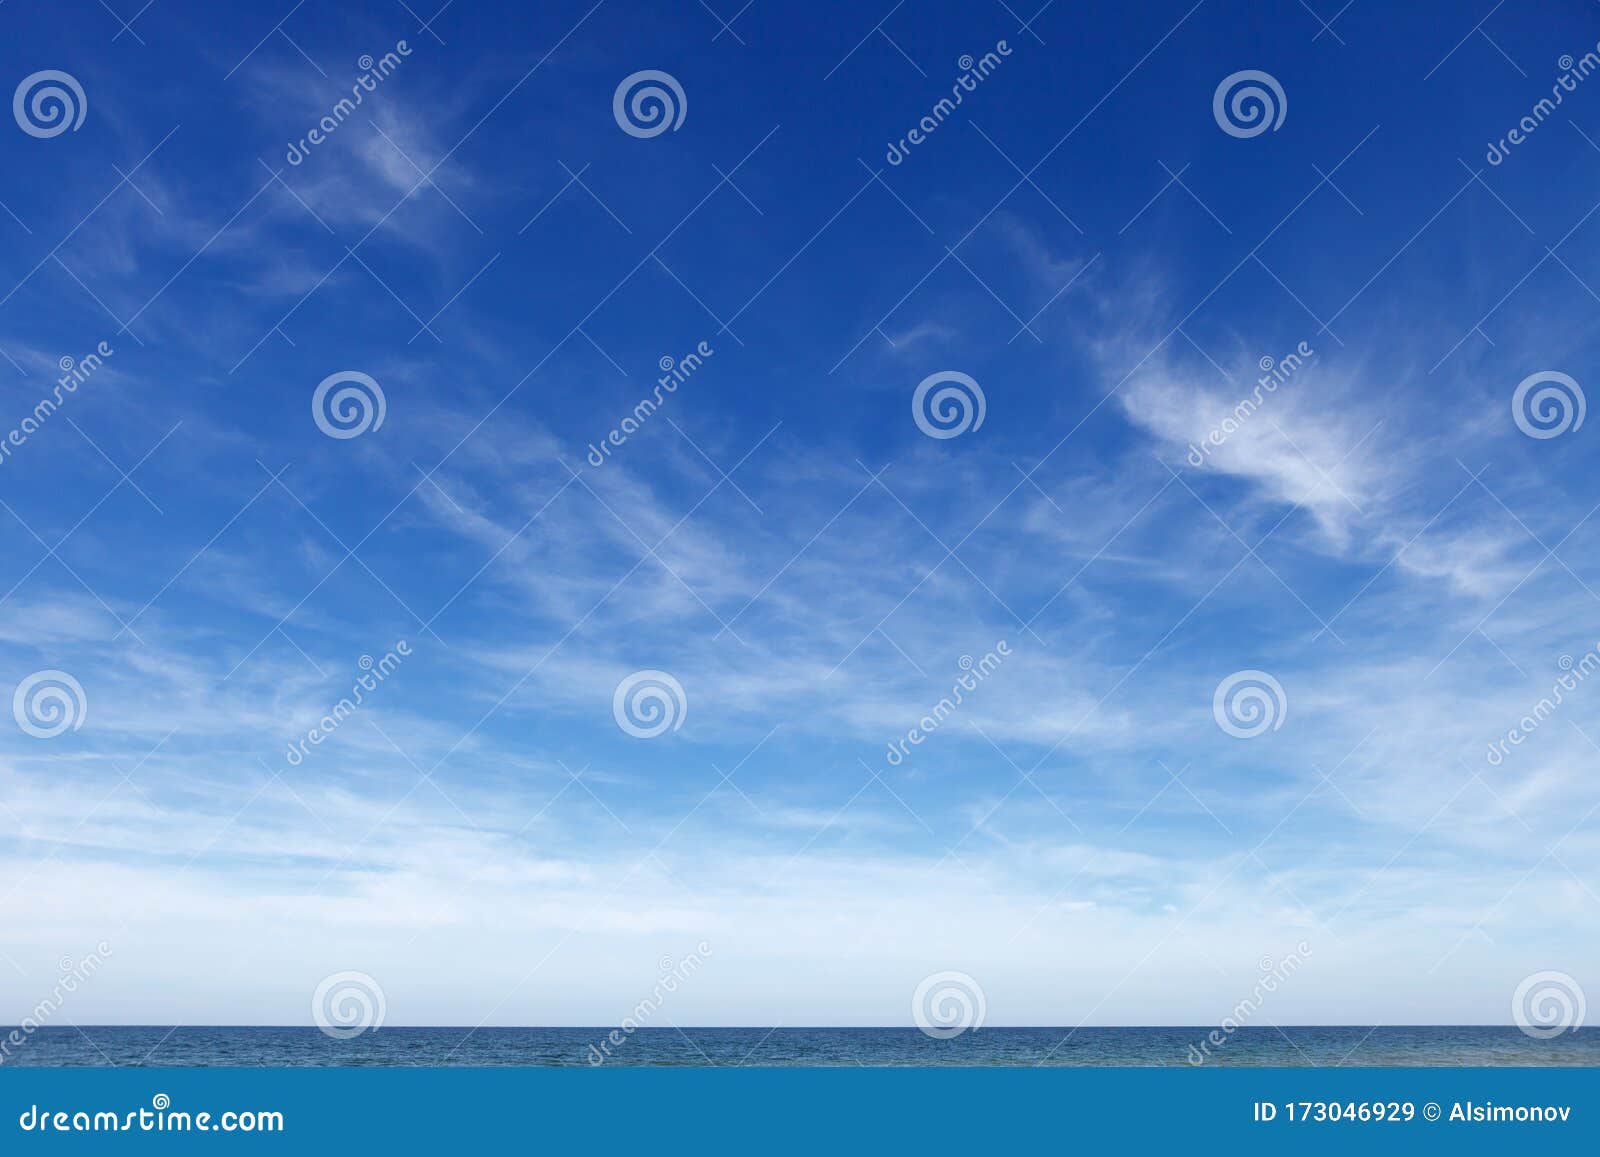 beautiful blue sky with cirrus clouds over the sea. skyline